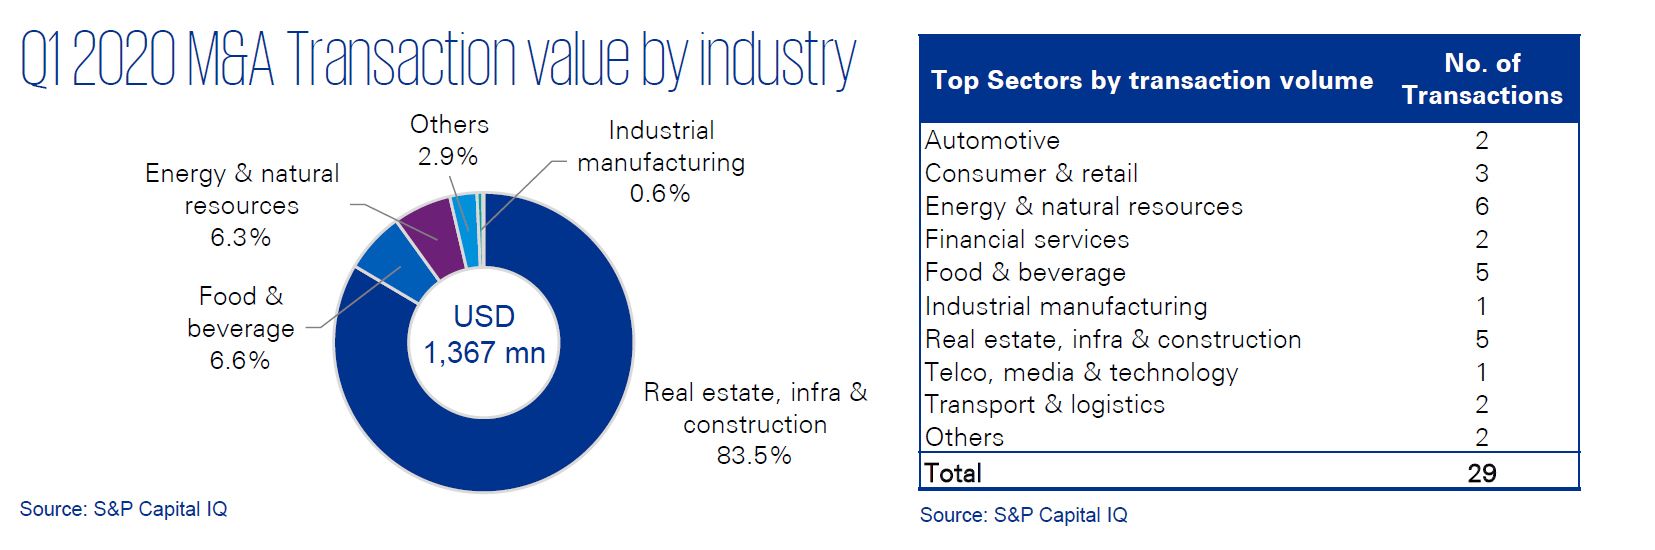 Q1 2020 M&A transaction value by industry